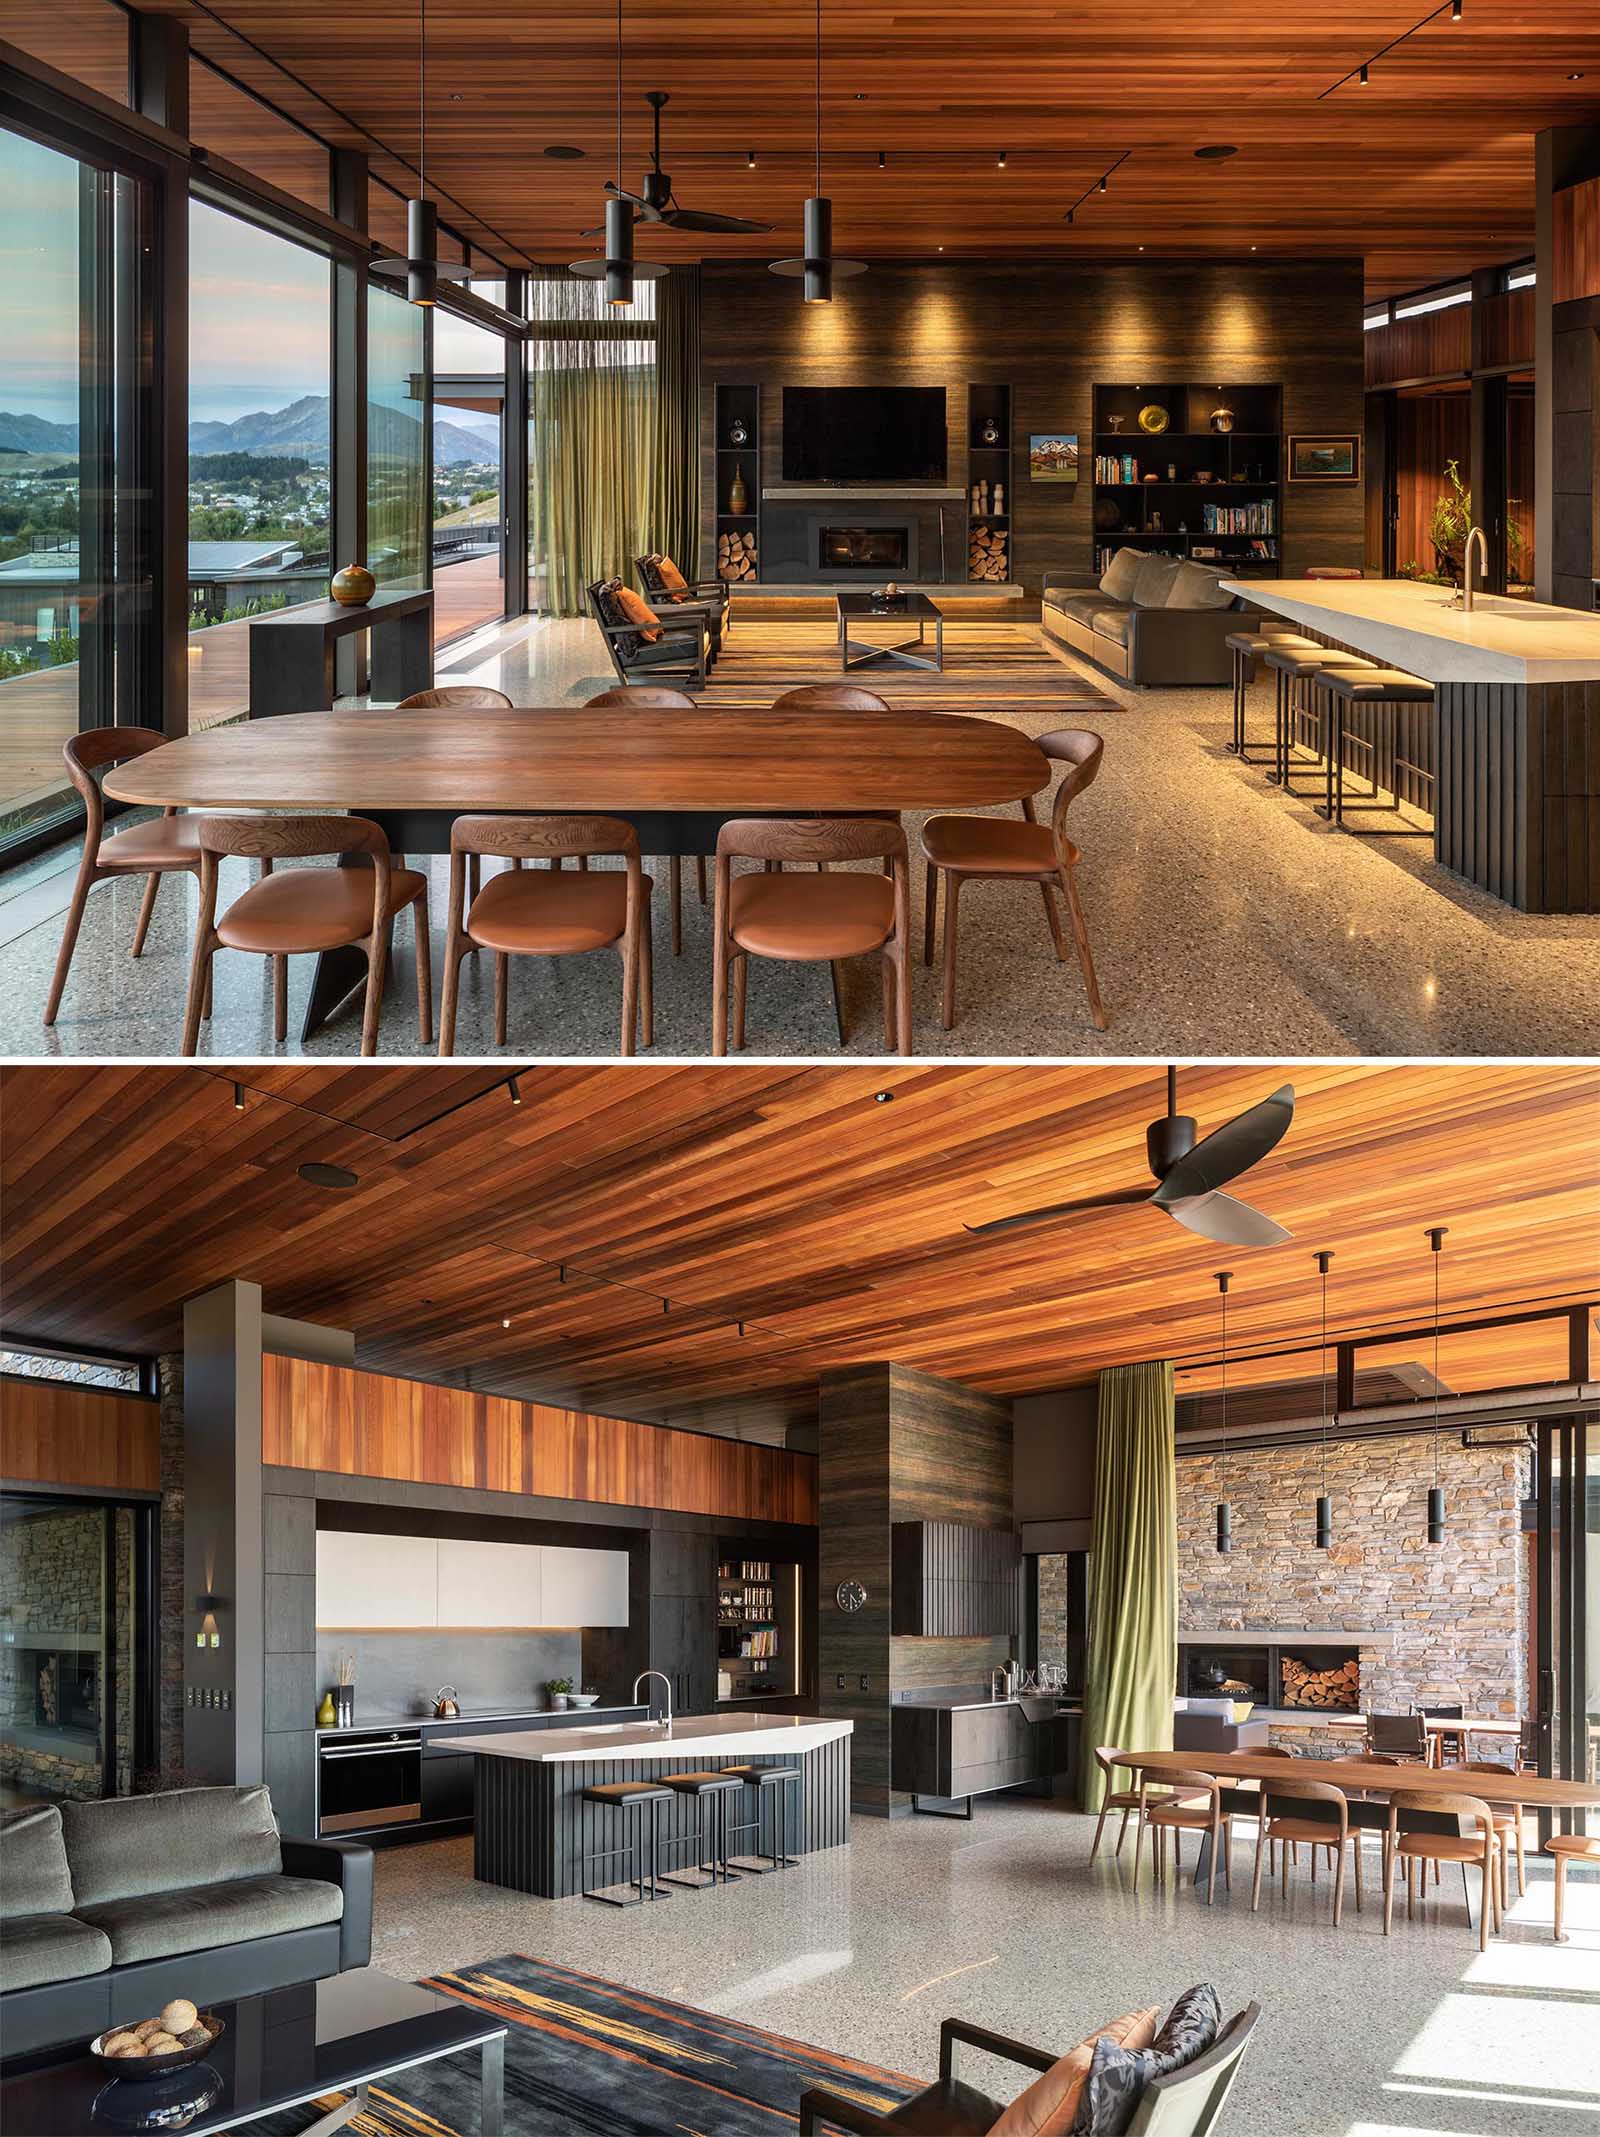 The deep colors and textures of the interior palette and natural exterior materials used throughout this modern home provide a rich backdrop to the sweeping views, with spaces planned to take in as much of the outdoors as possible while still keeping the homeowners warm and snug in winter.